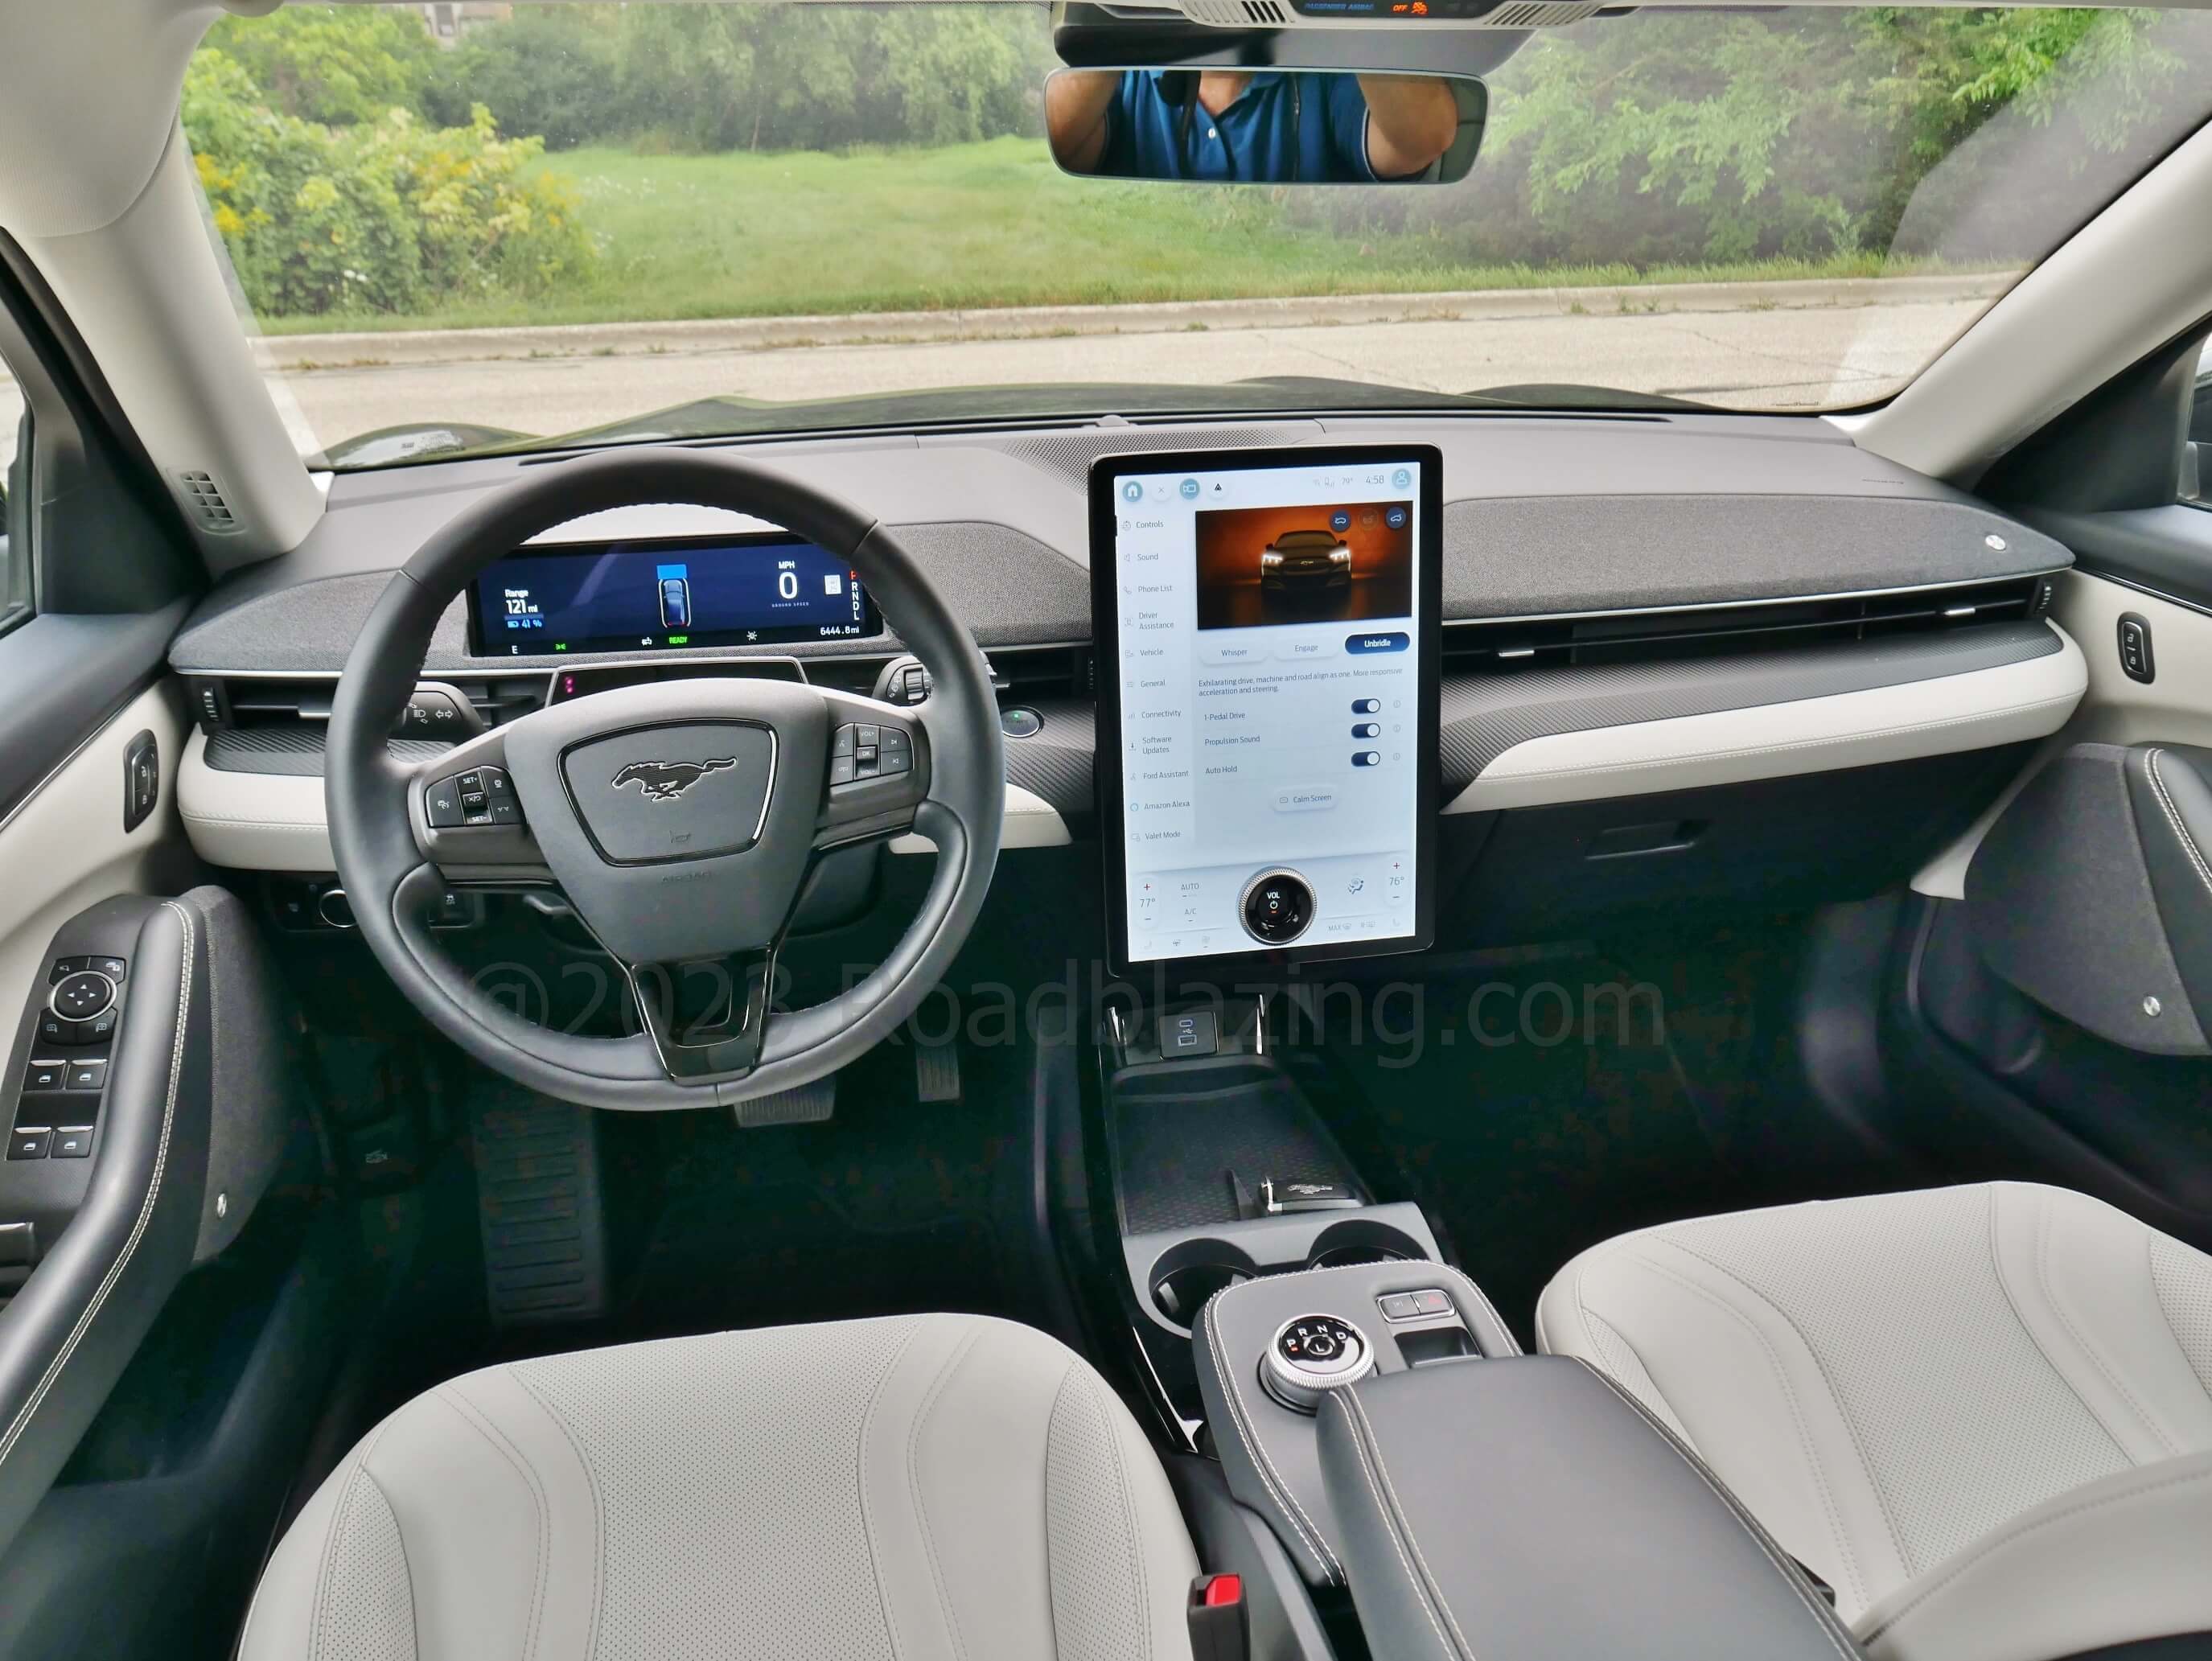 2023 Ford Mustang Mach-E Premium AWD: 10.2" landscape instrument cluster & MyFordSync 4 15.0" portrait touch tablet infotainment screens dominate.